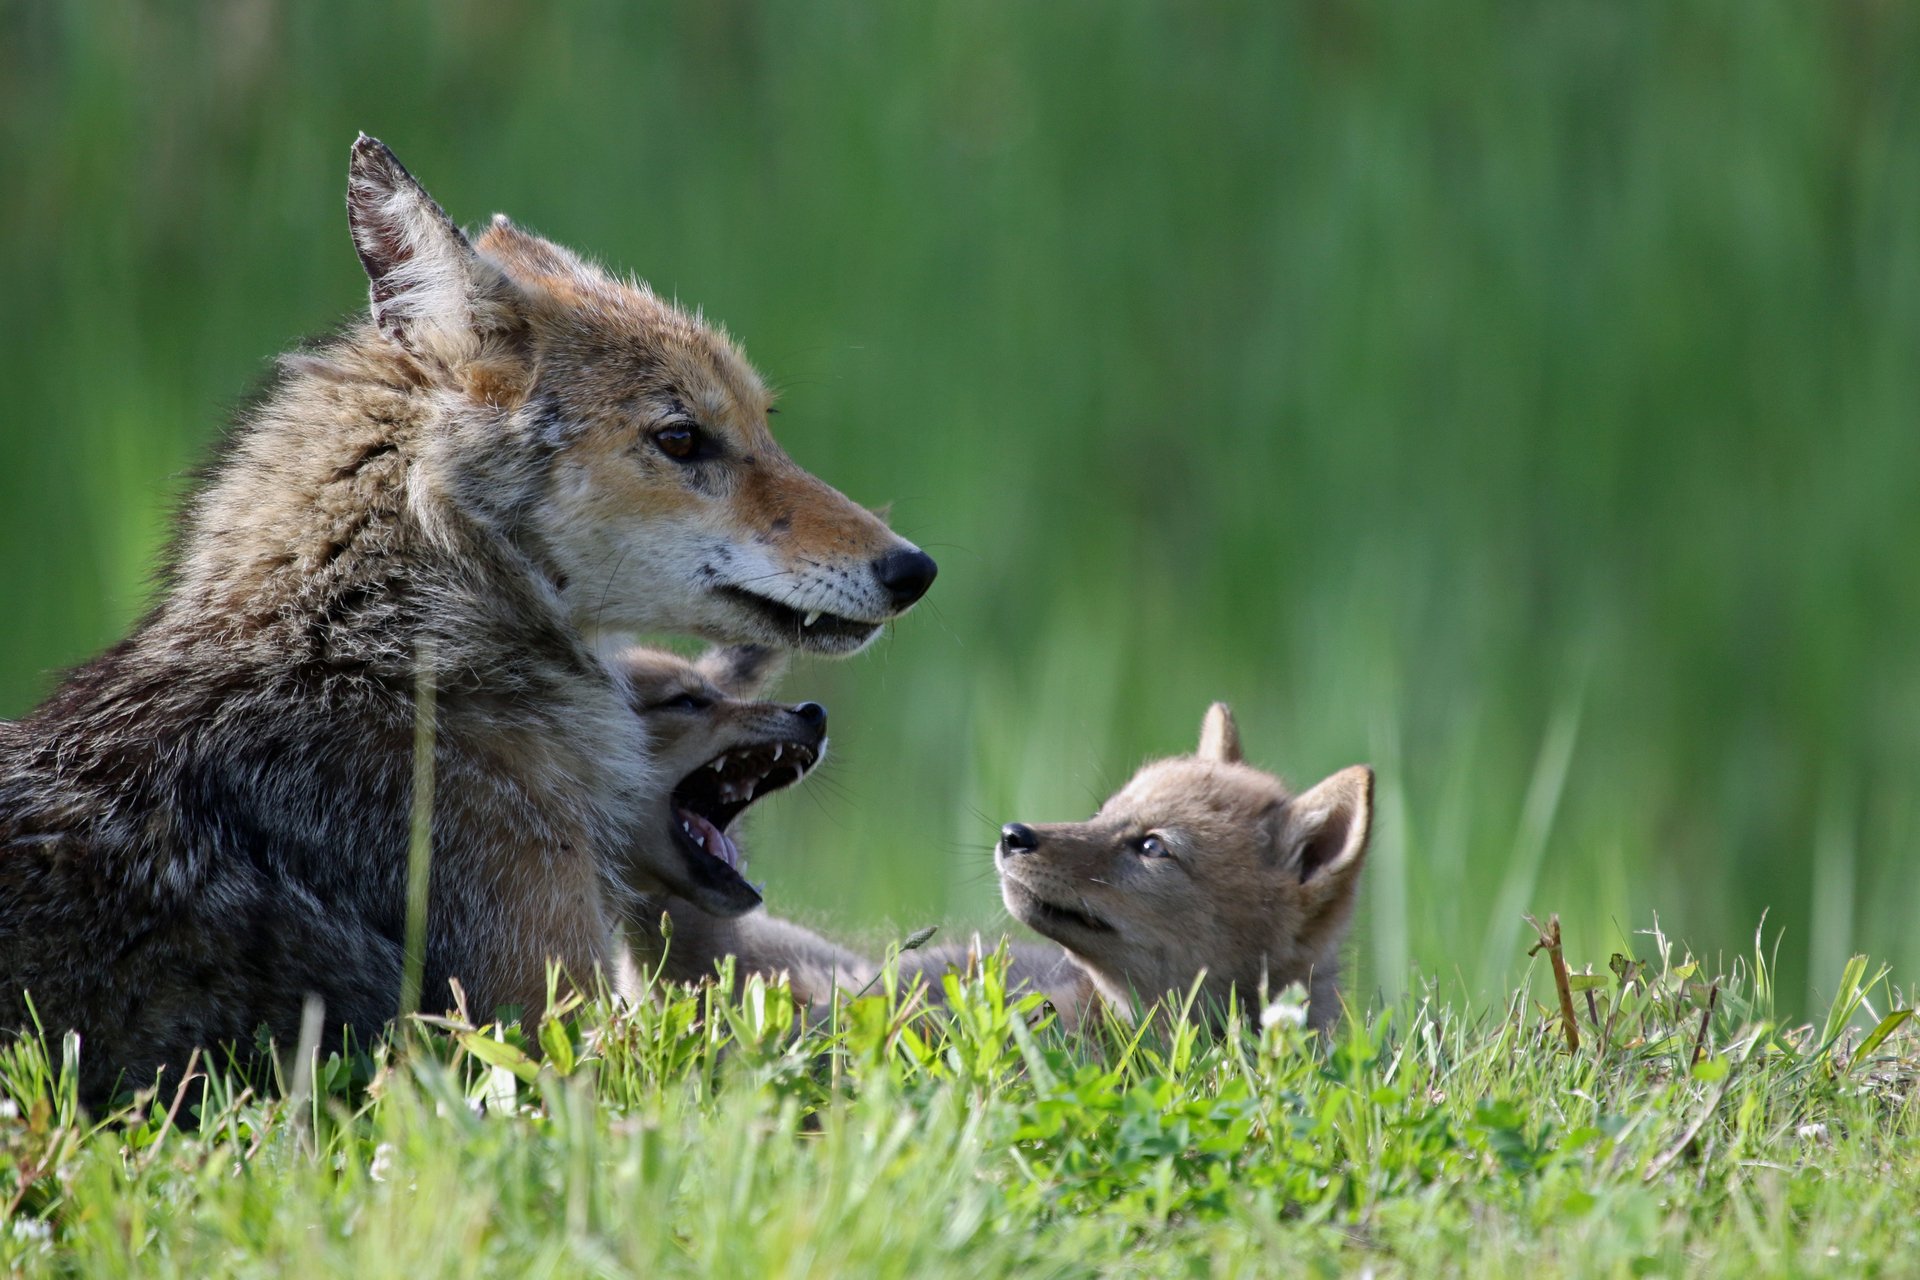 Two coyote pups playing in the grass in front of an adult coyote.